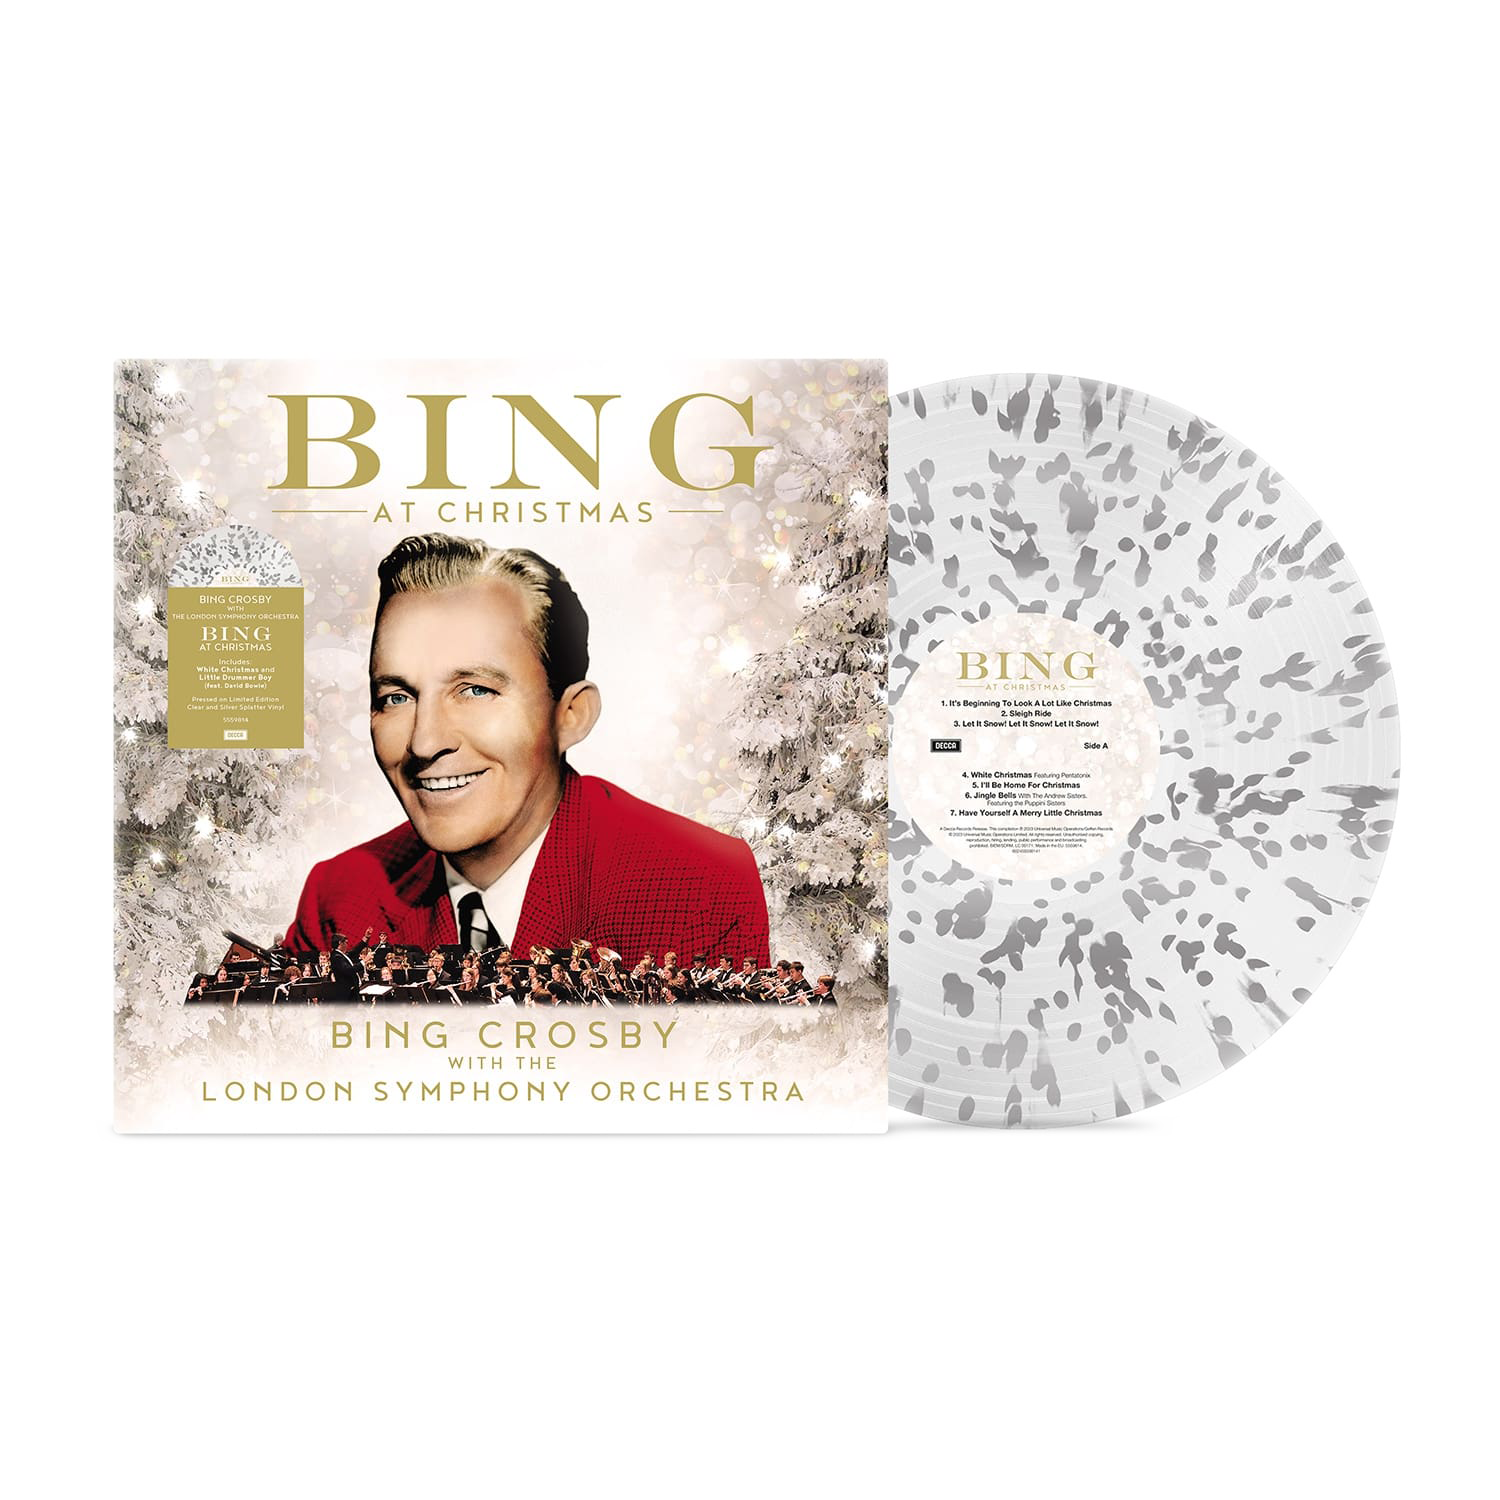 Bing Crosby, London Symphony Orchestra - Bing at Christmas: Limited Speckled Vinyl LP